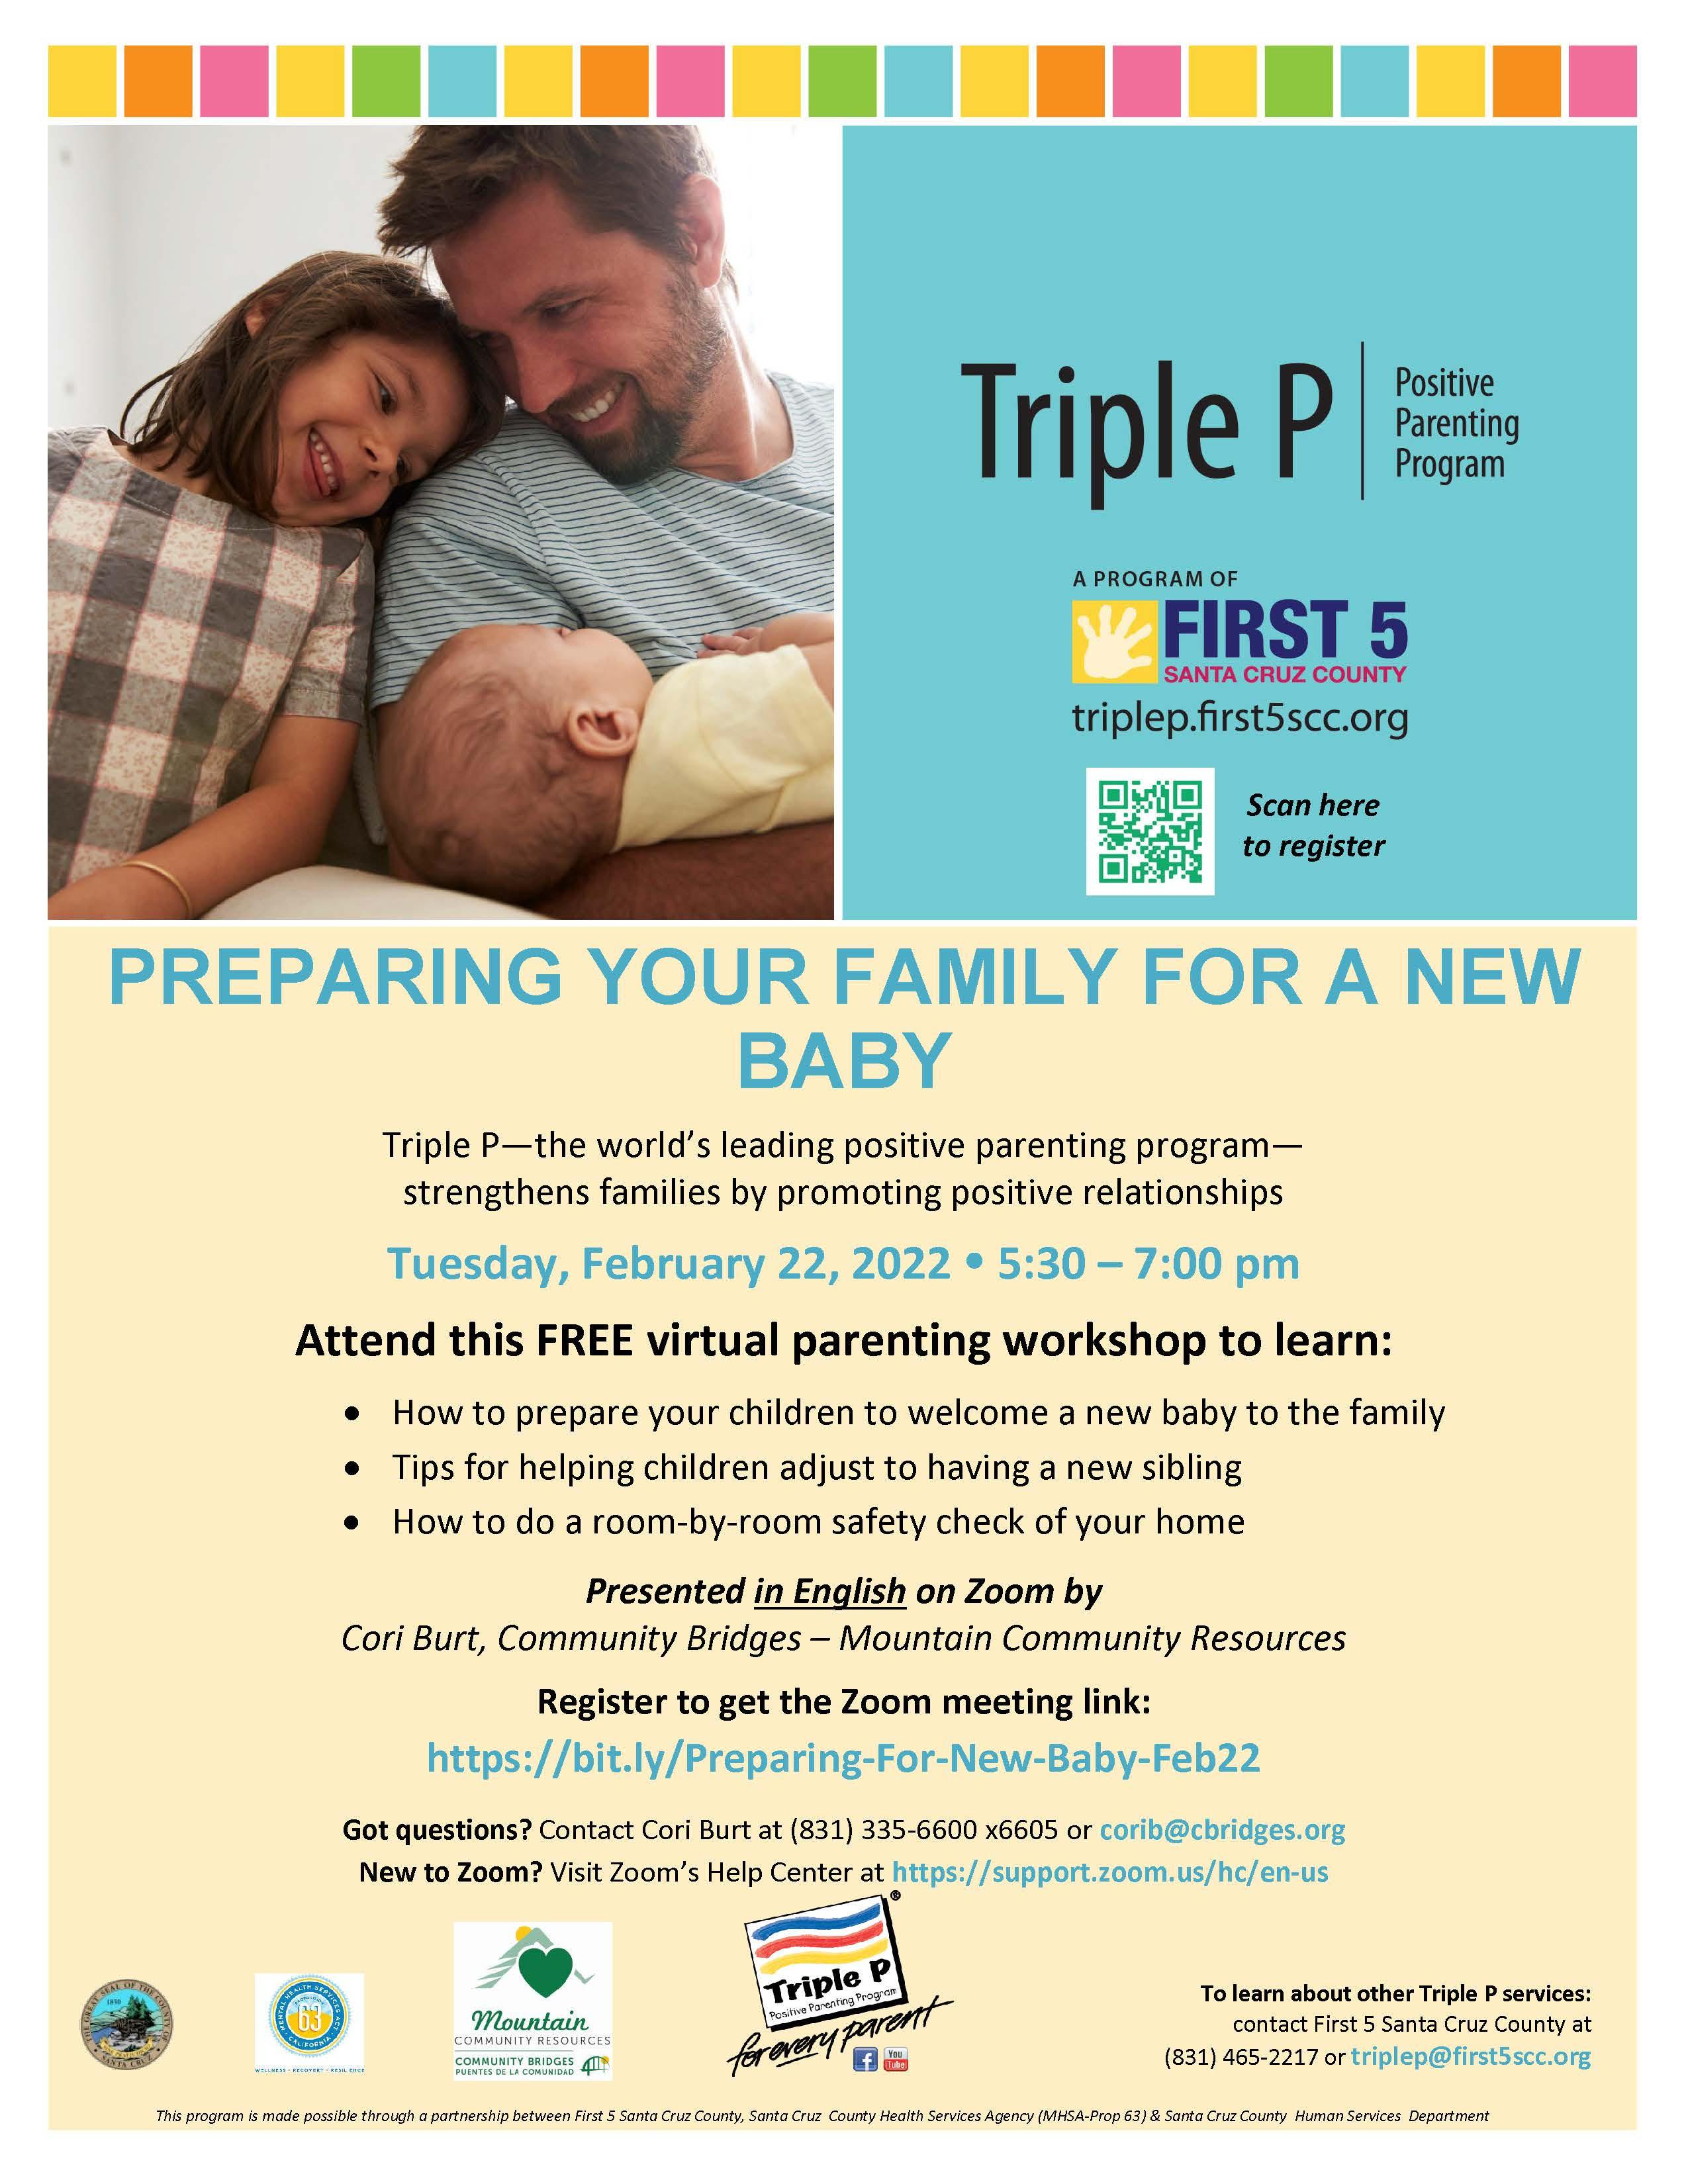 Triple P - preparing your family for a new baby